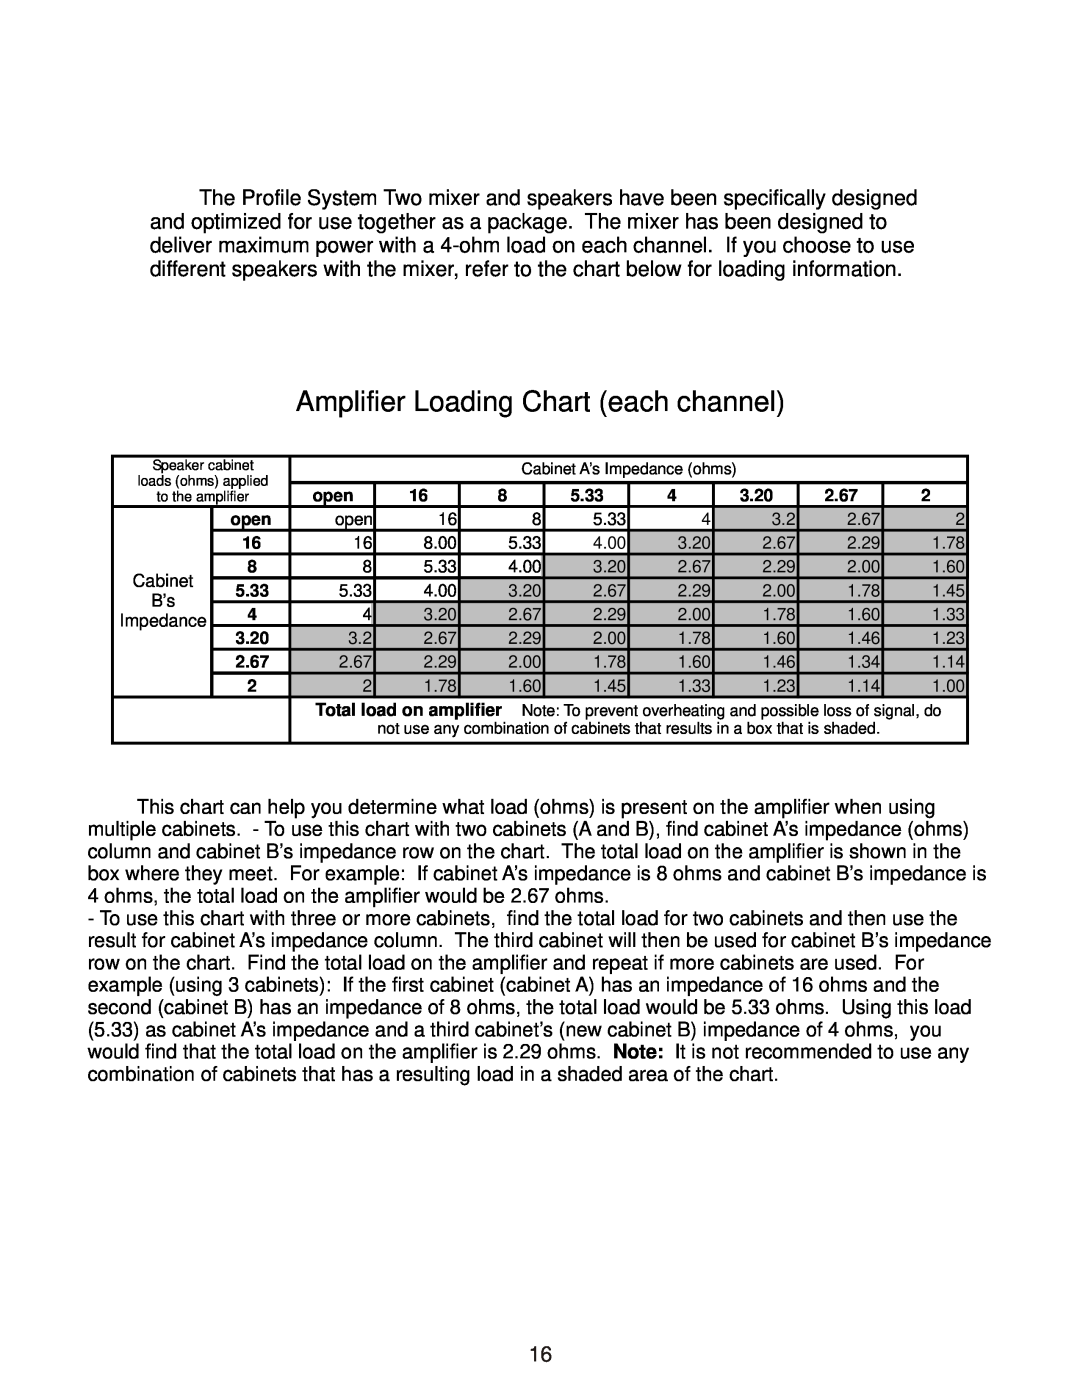 Kustom Profile System Two owner manual Amplifier Loading Chart each channel 